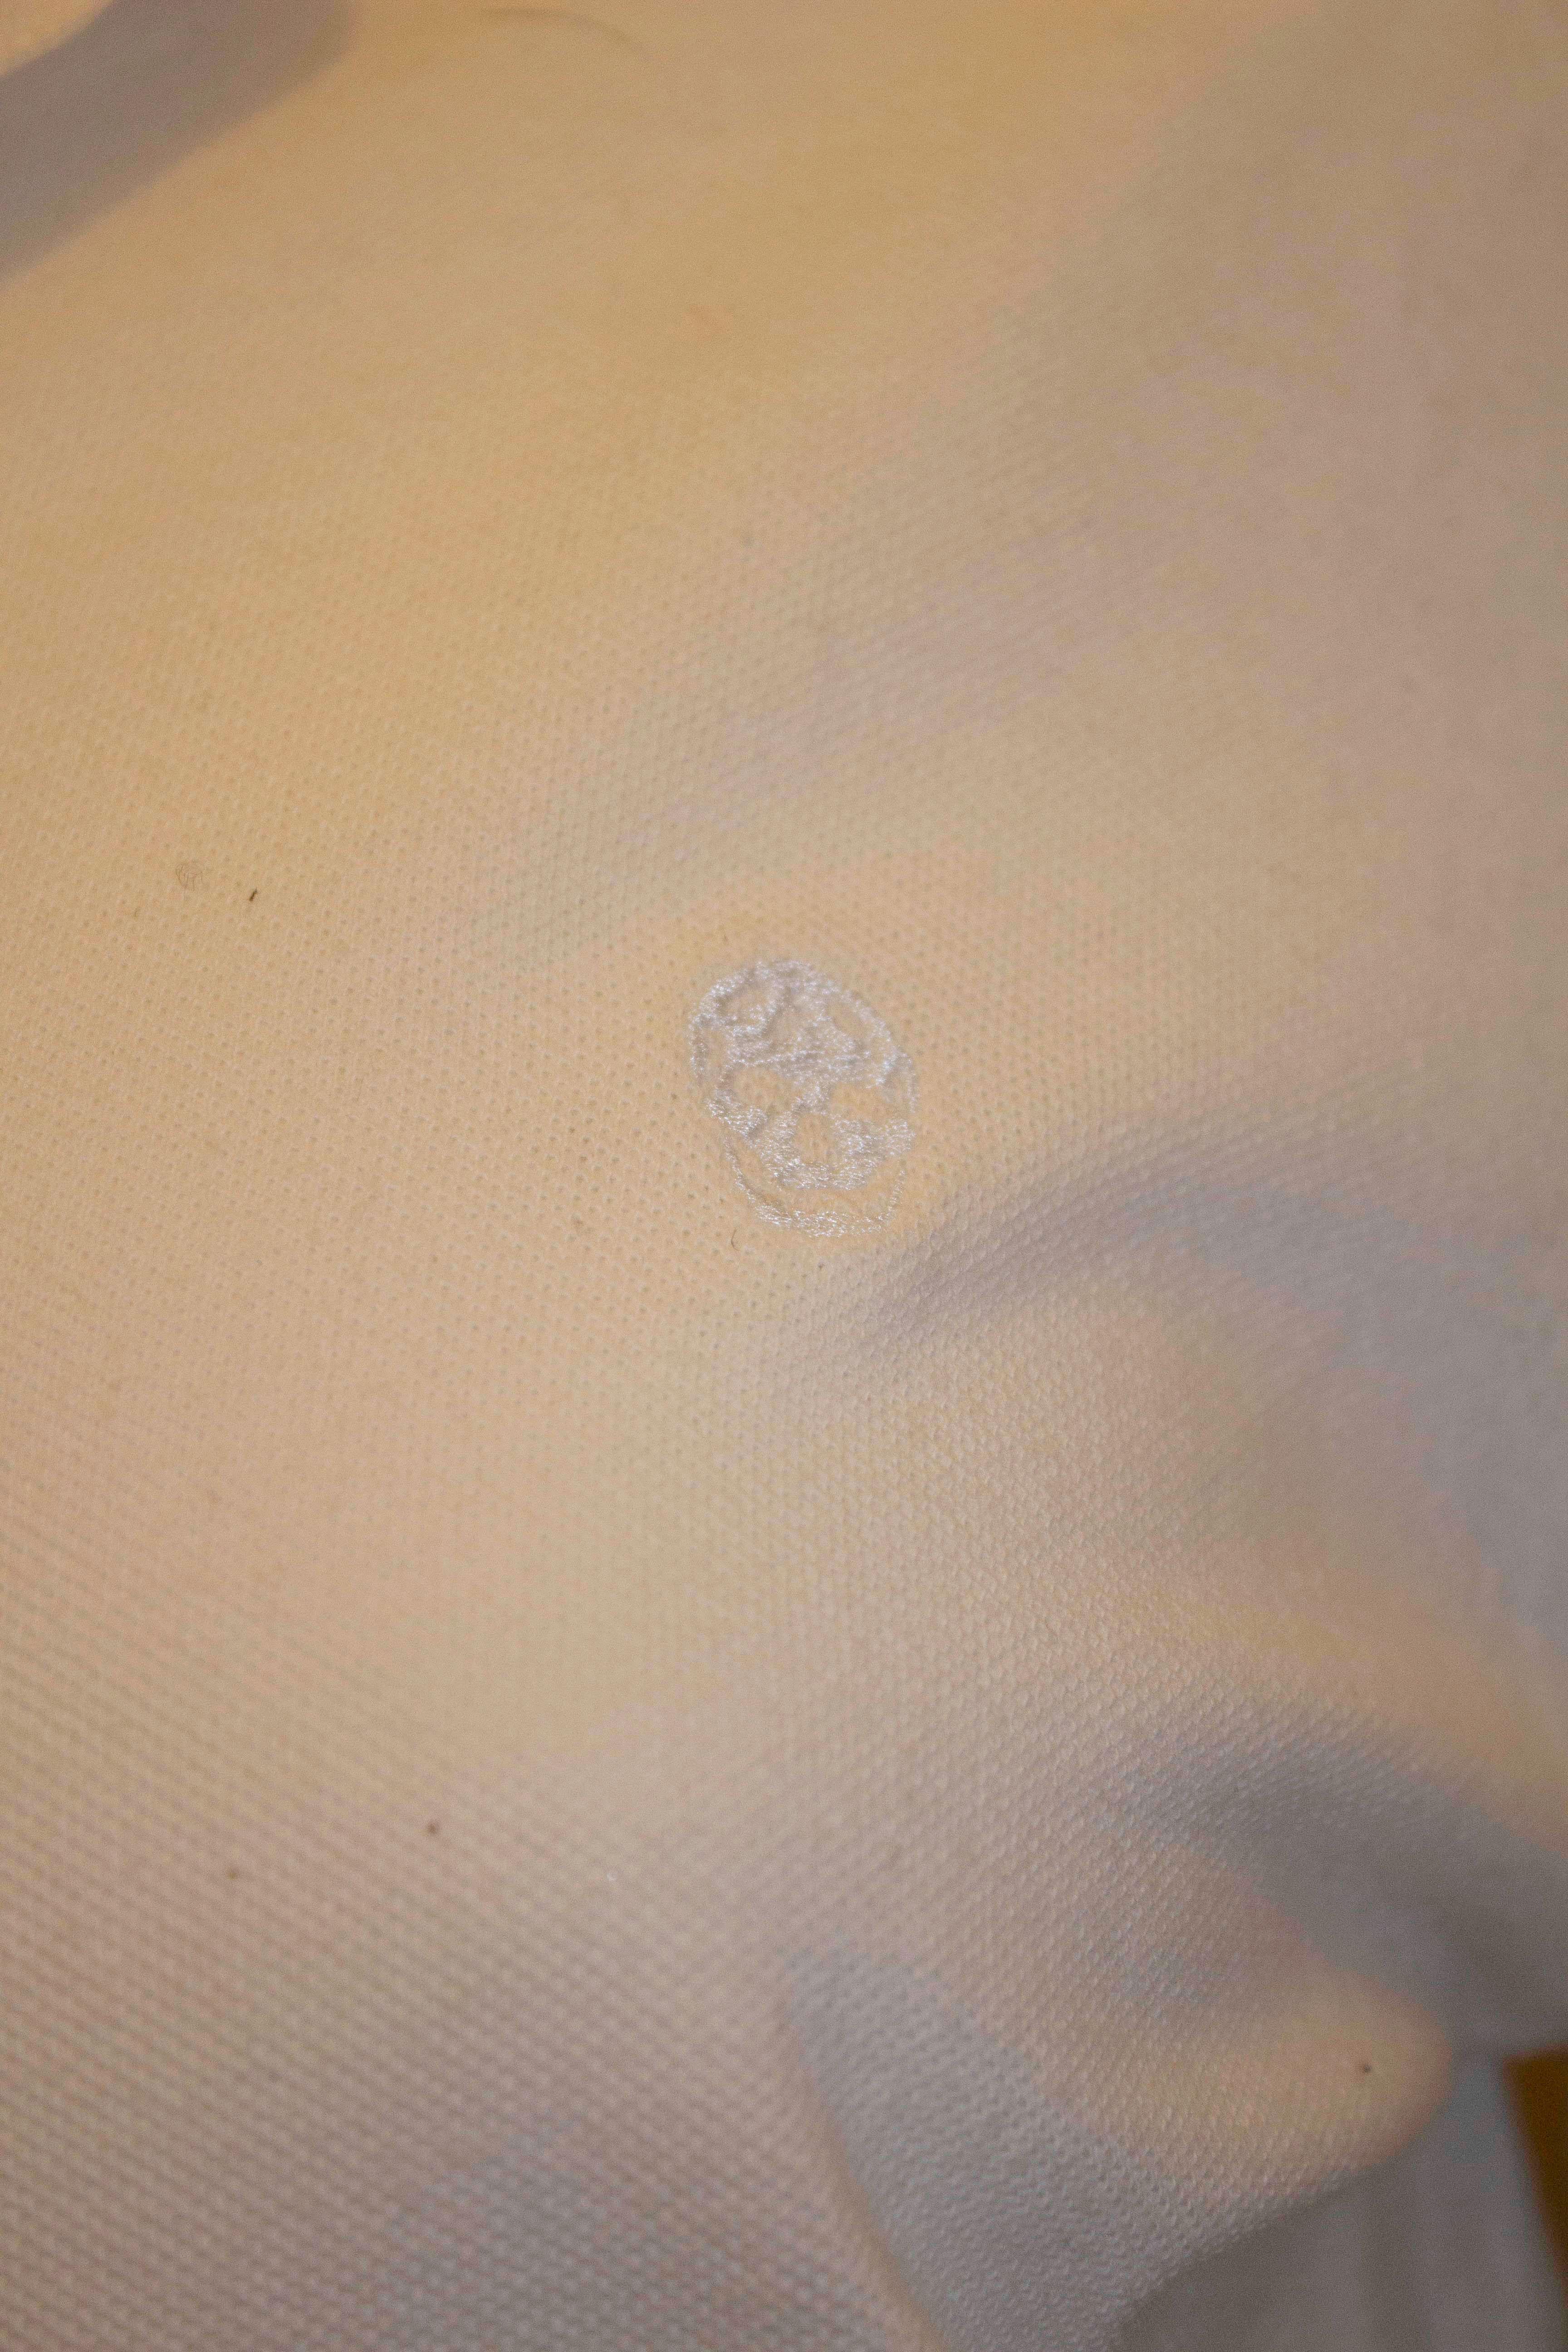 Alexander McQueen White Polo Shirt In Good Condition For Sale In London, GB